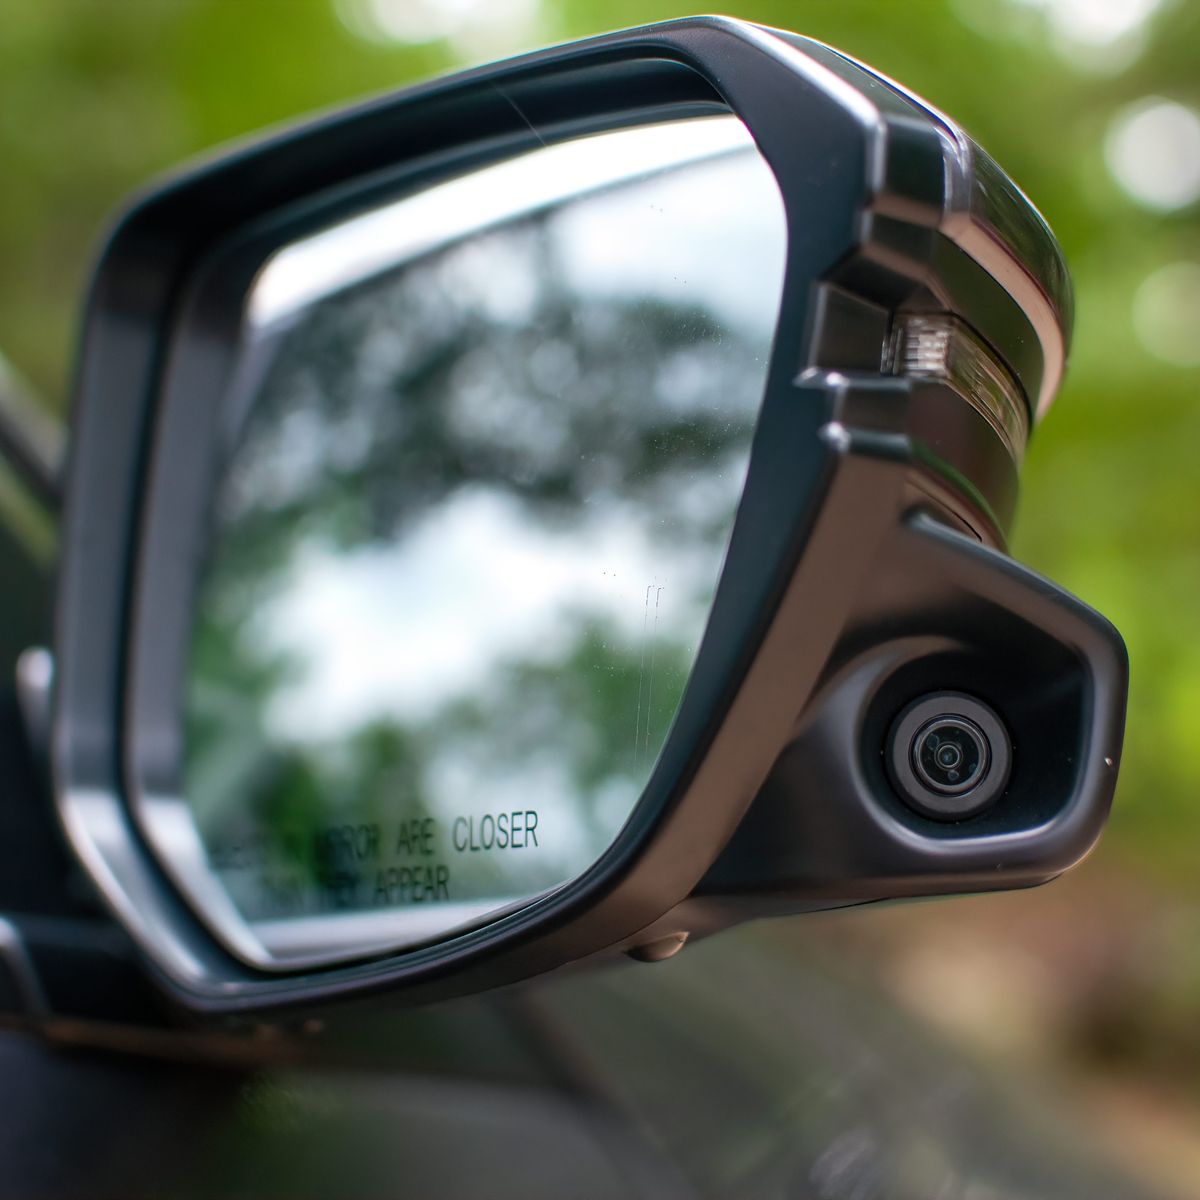 Honda Is Phasing Out LaneWatch in Favor of Blind-Spot Monitoring